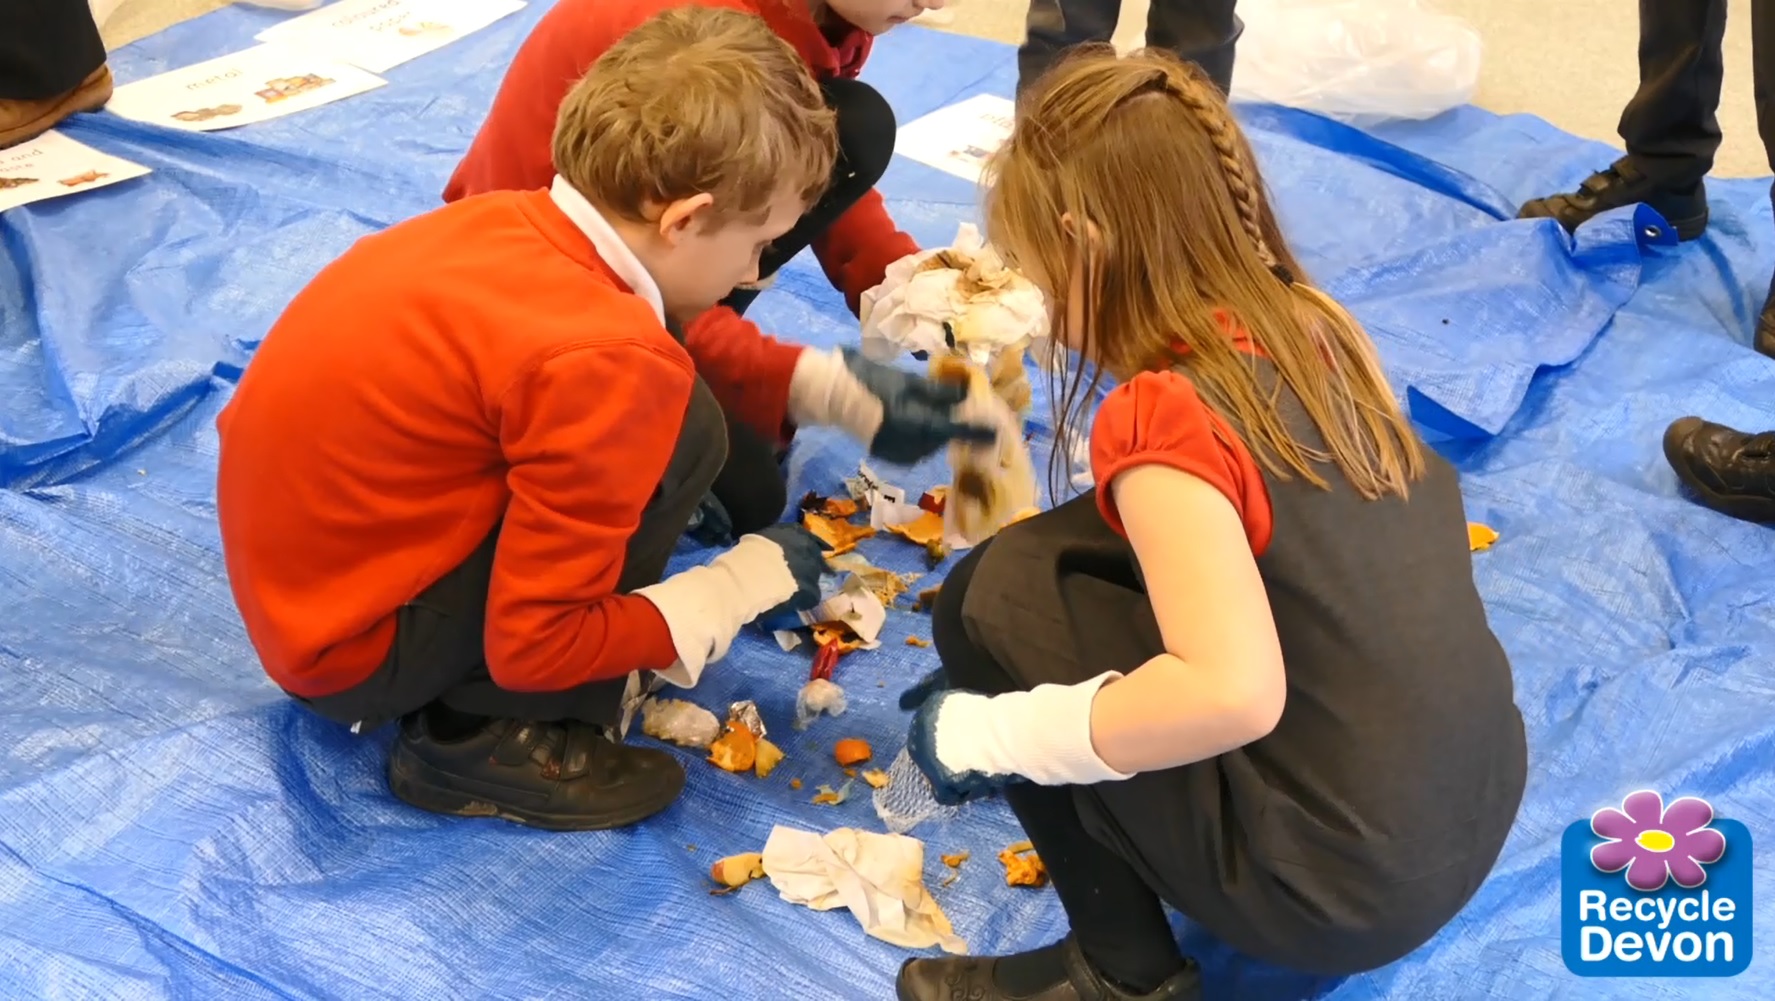 Children carrying out a waste audit by sorting school waste into different piles